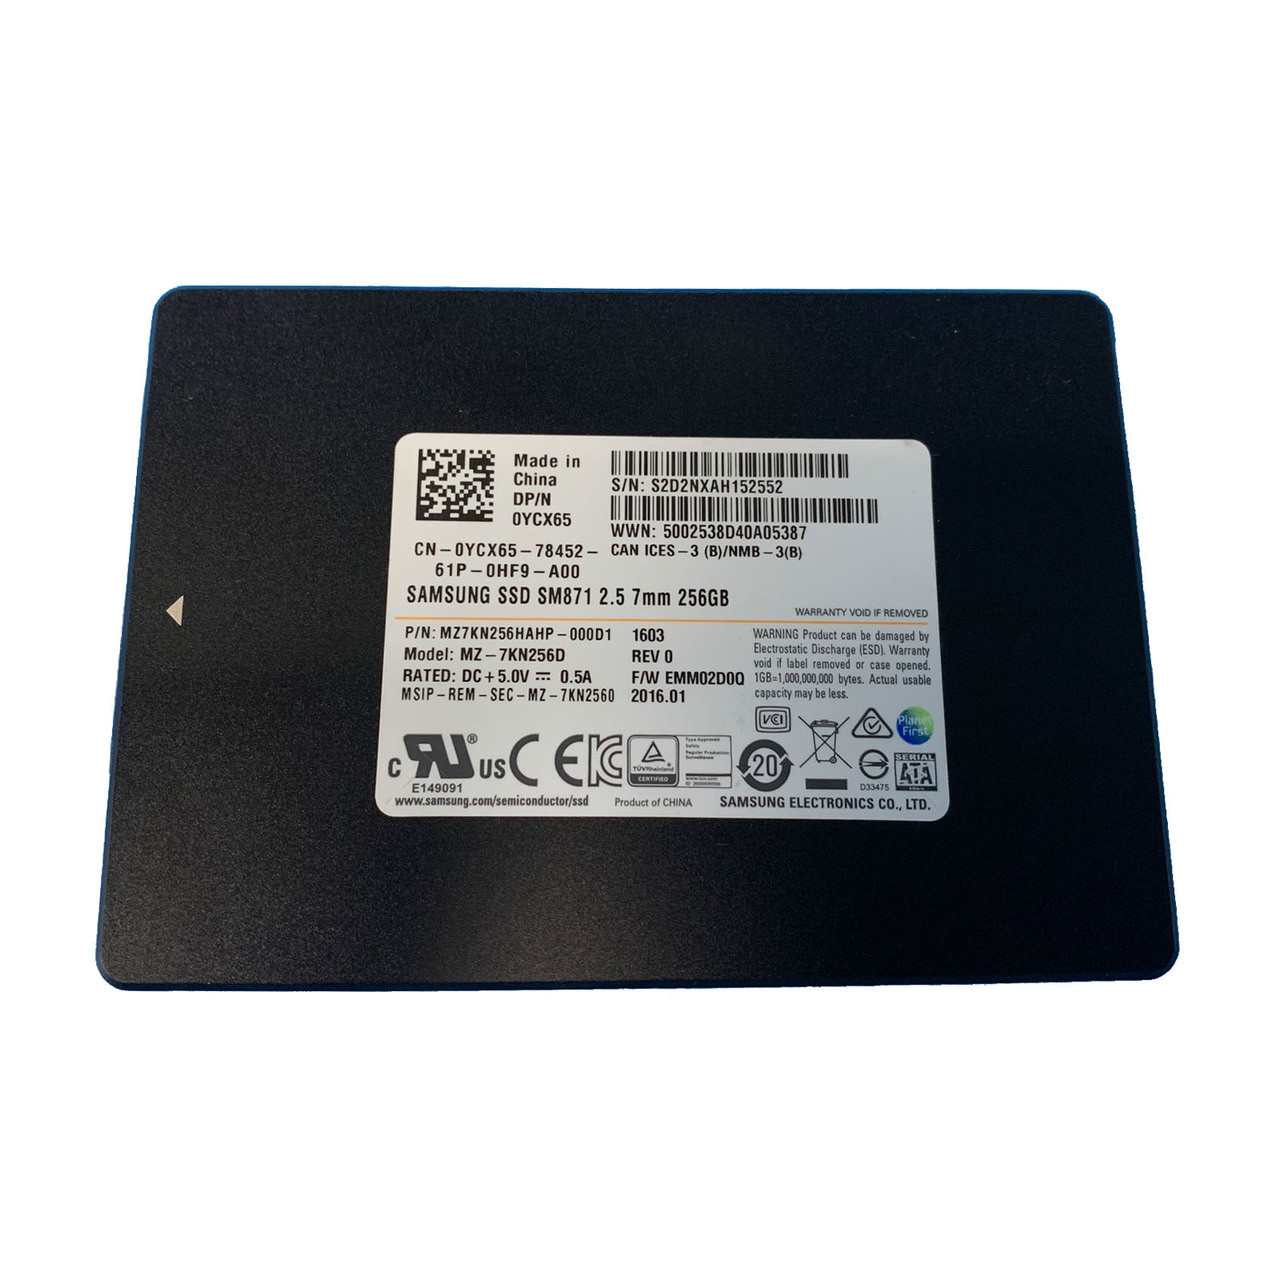 Dell YCX65 256GB 6GBPS 2.5" SSD MZ-7KN256D  MZ7KN256HAHP-000D1